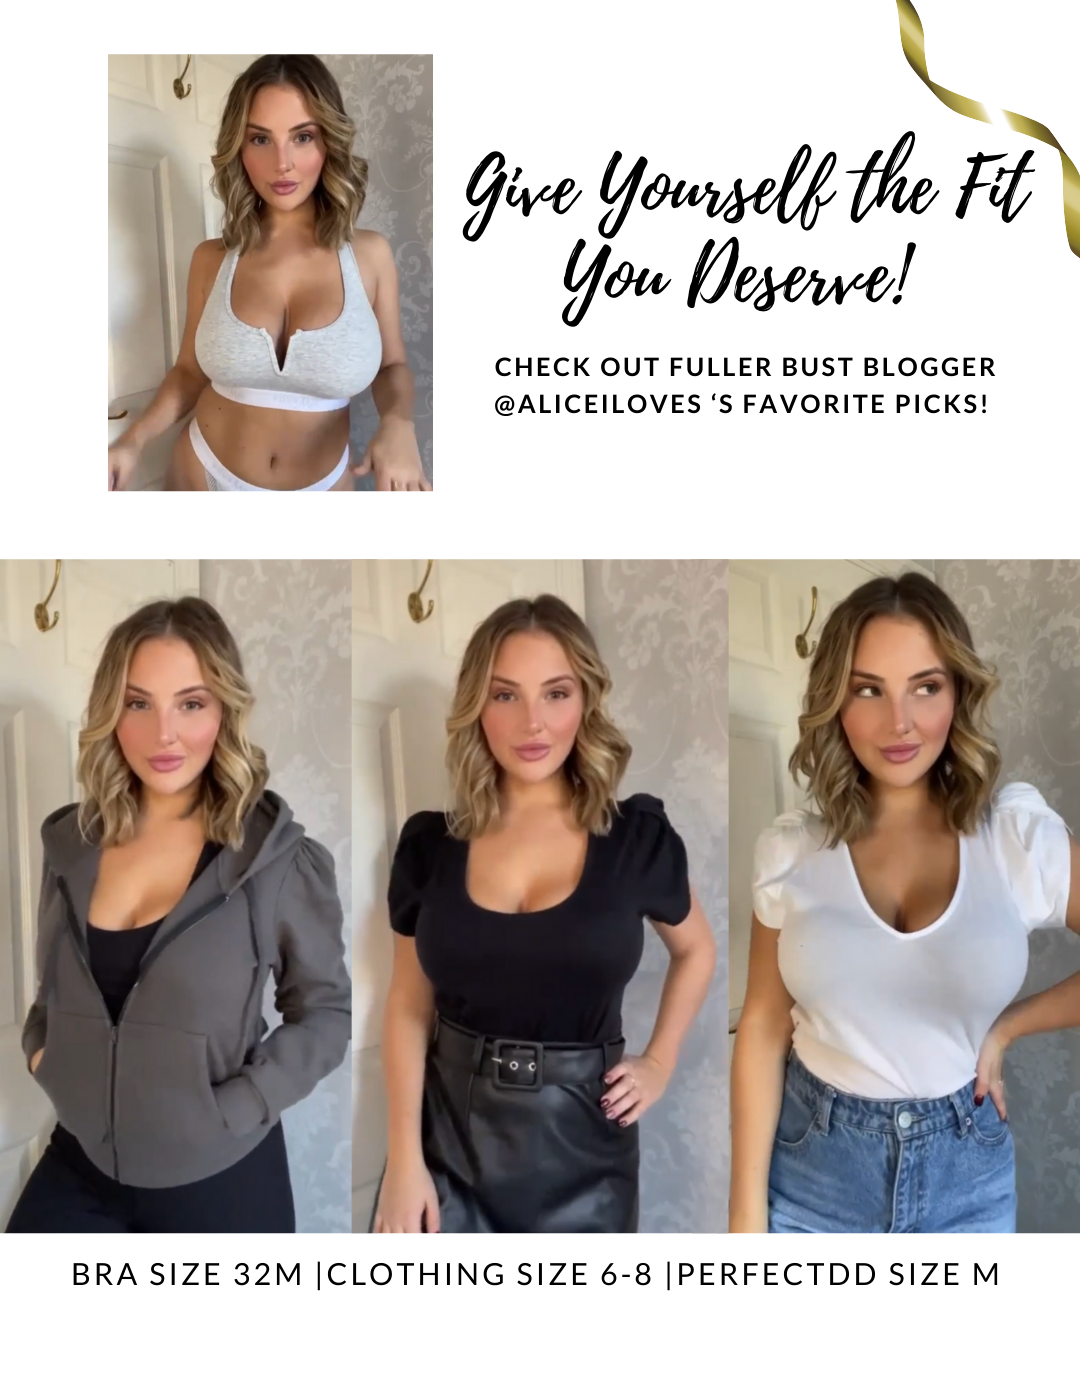 PerfectDD: Give Yourself the Fit You Deserve!